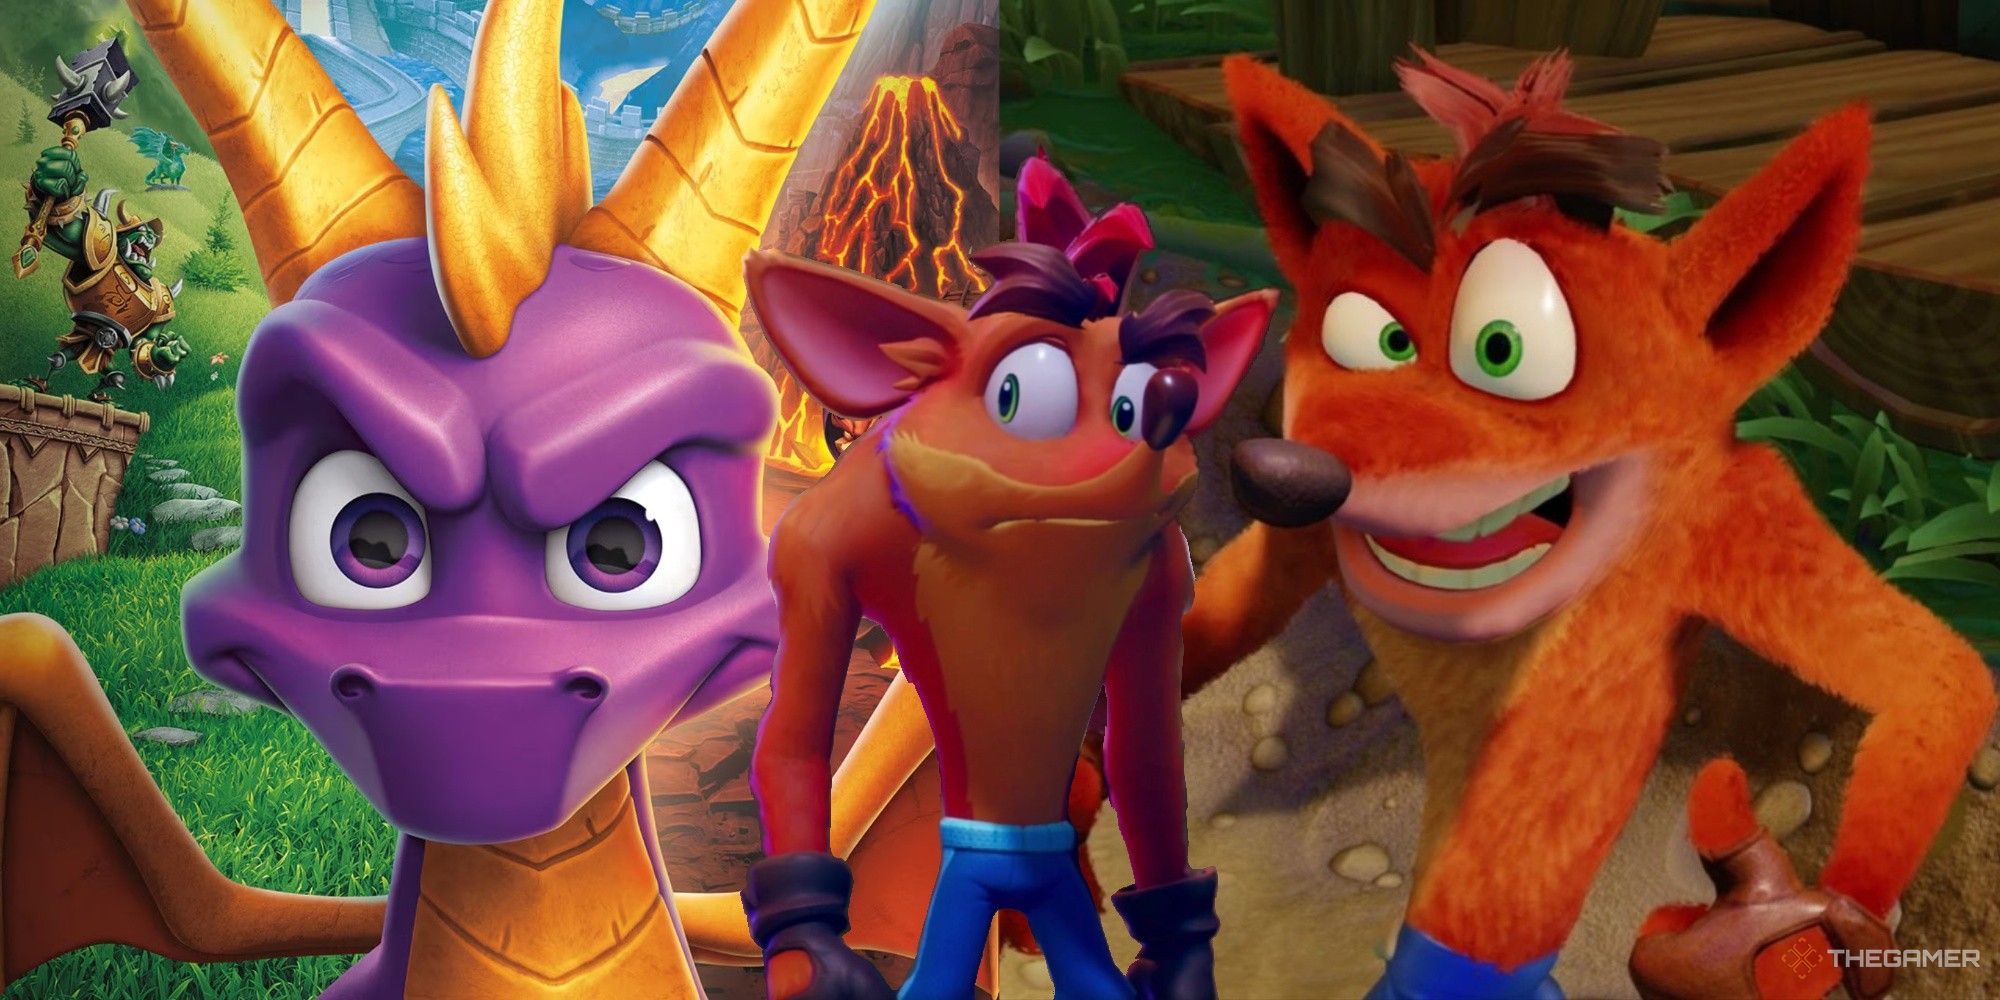 spyro and crash with crash 4's character model standing in the middle